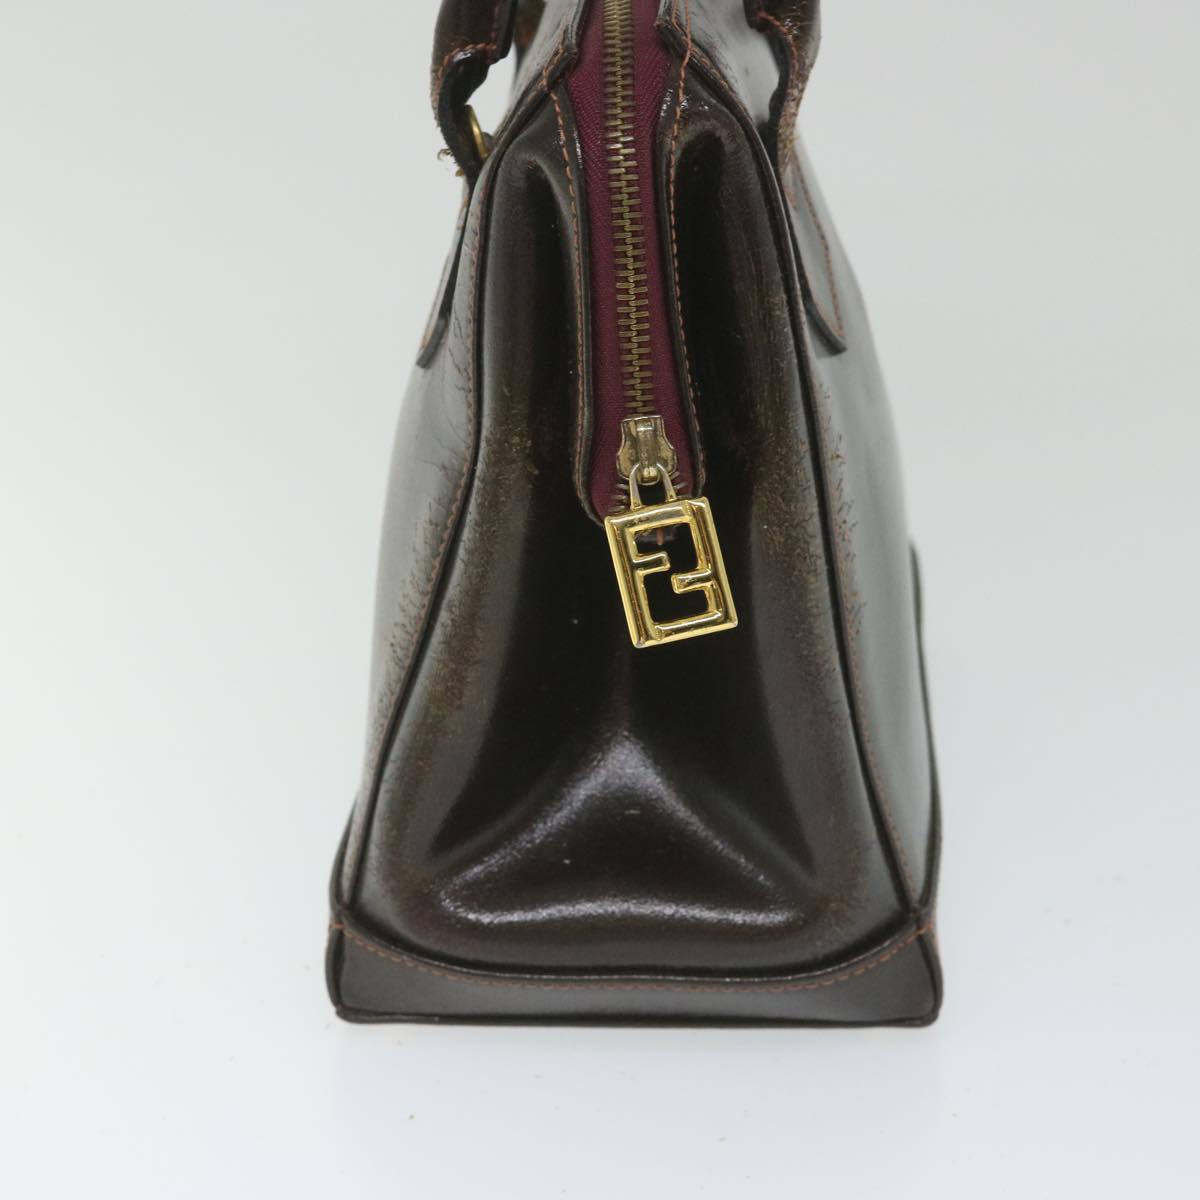 FENDI Hand Bag Leather 2way Brown Auth bs9432